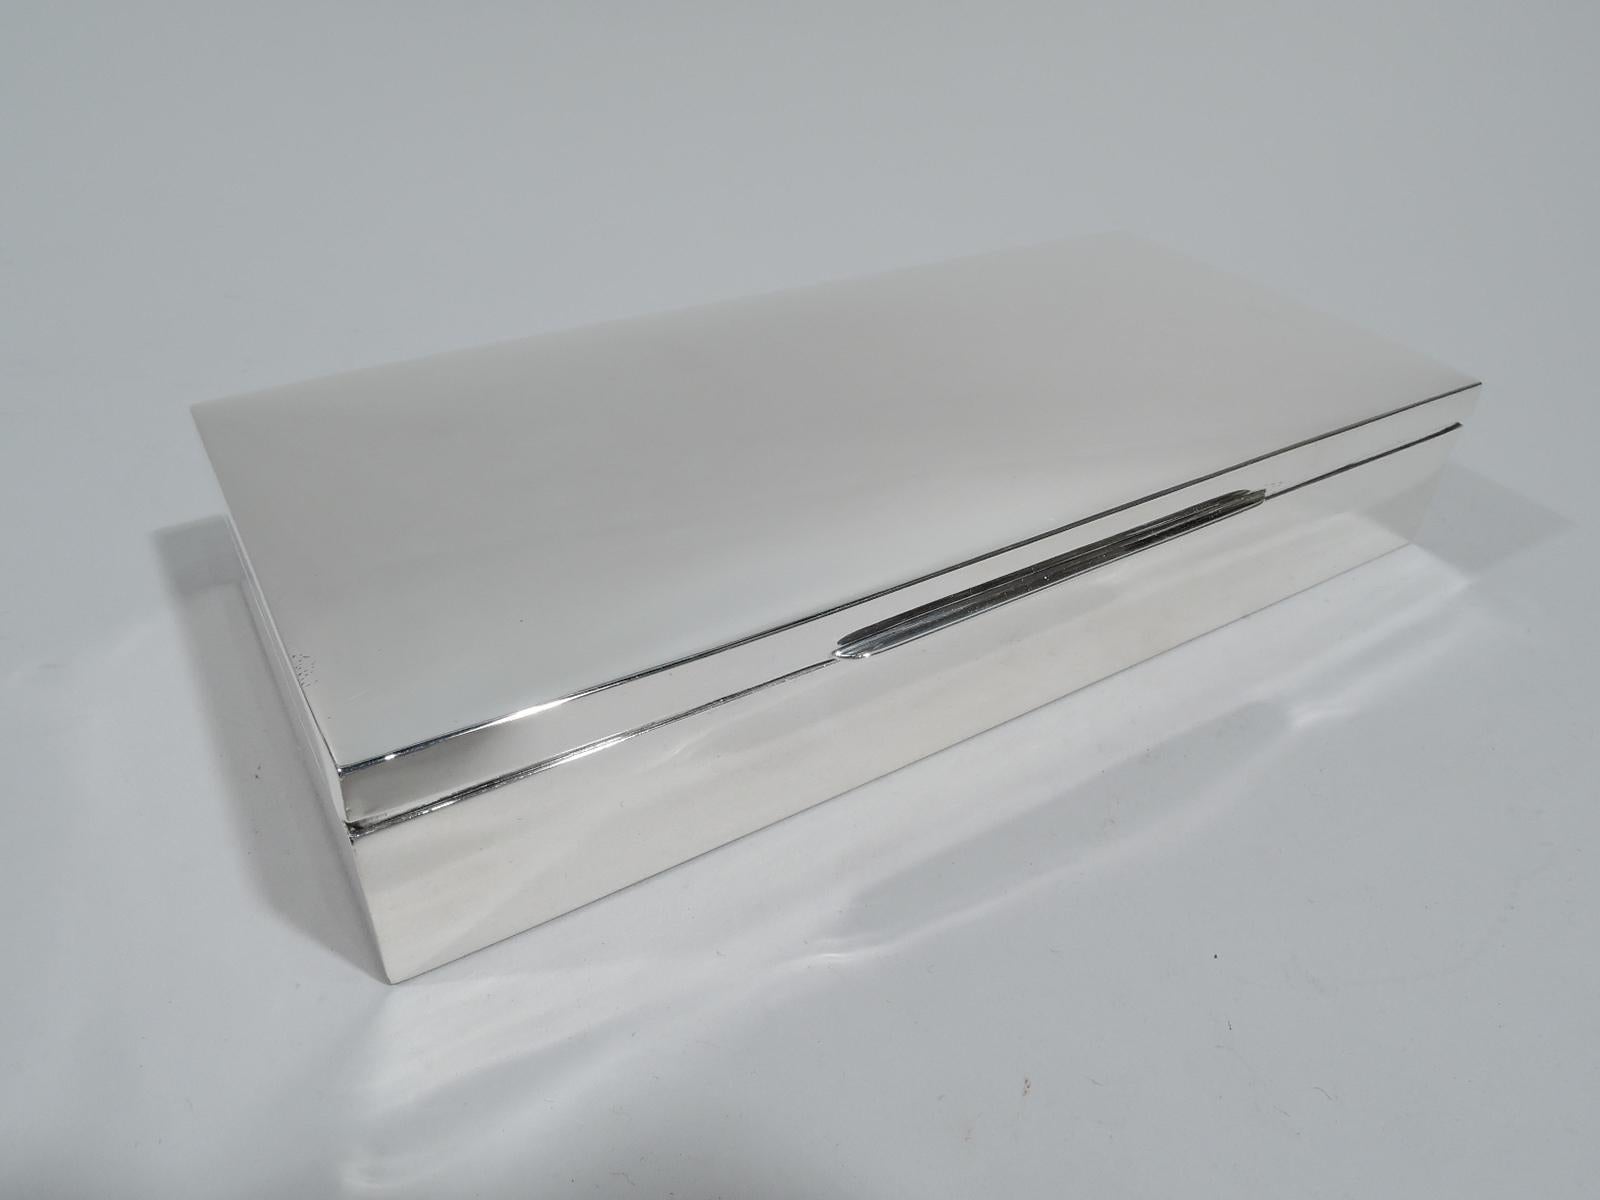 American Mid-Century Modern sterling silver box. Rectangular with straight sides. Cover hinged and gently curved with linear tab. Box interior cedar lined and partitioned. Marked “Sterling”. Gross weight: 12 troy ounces.